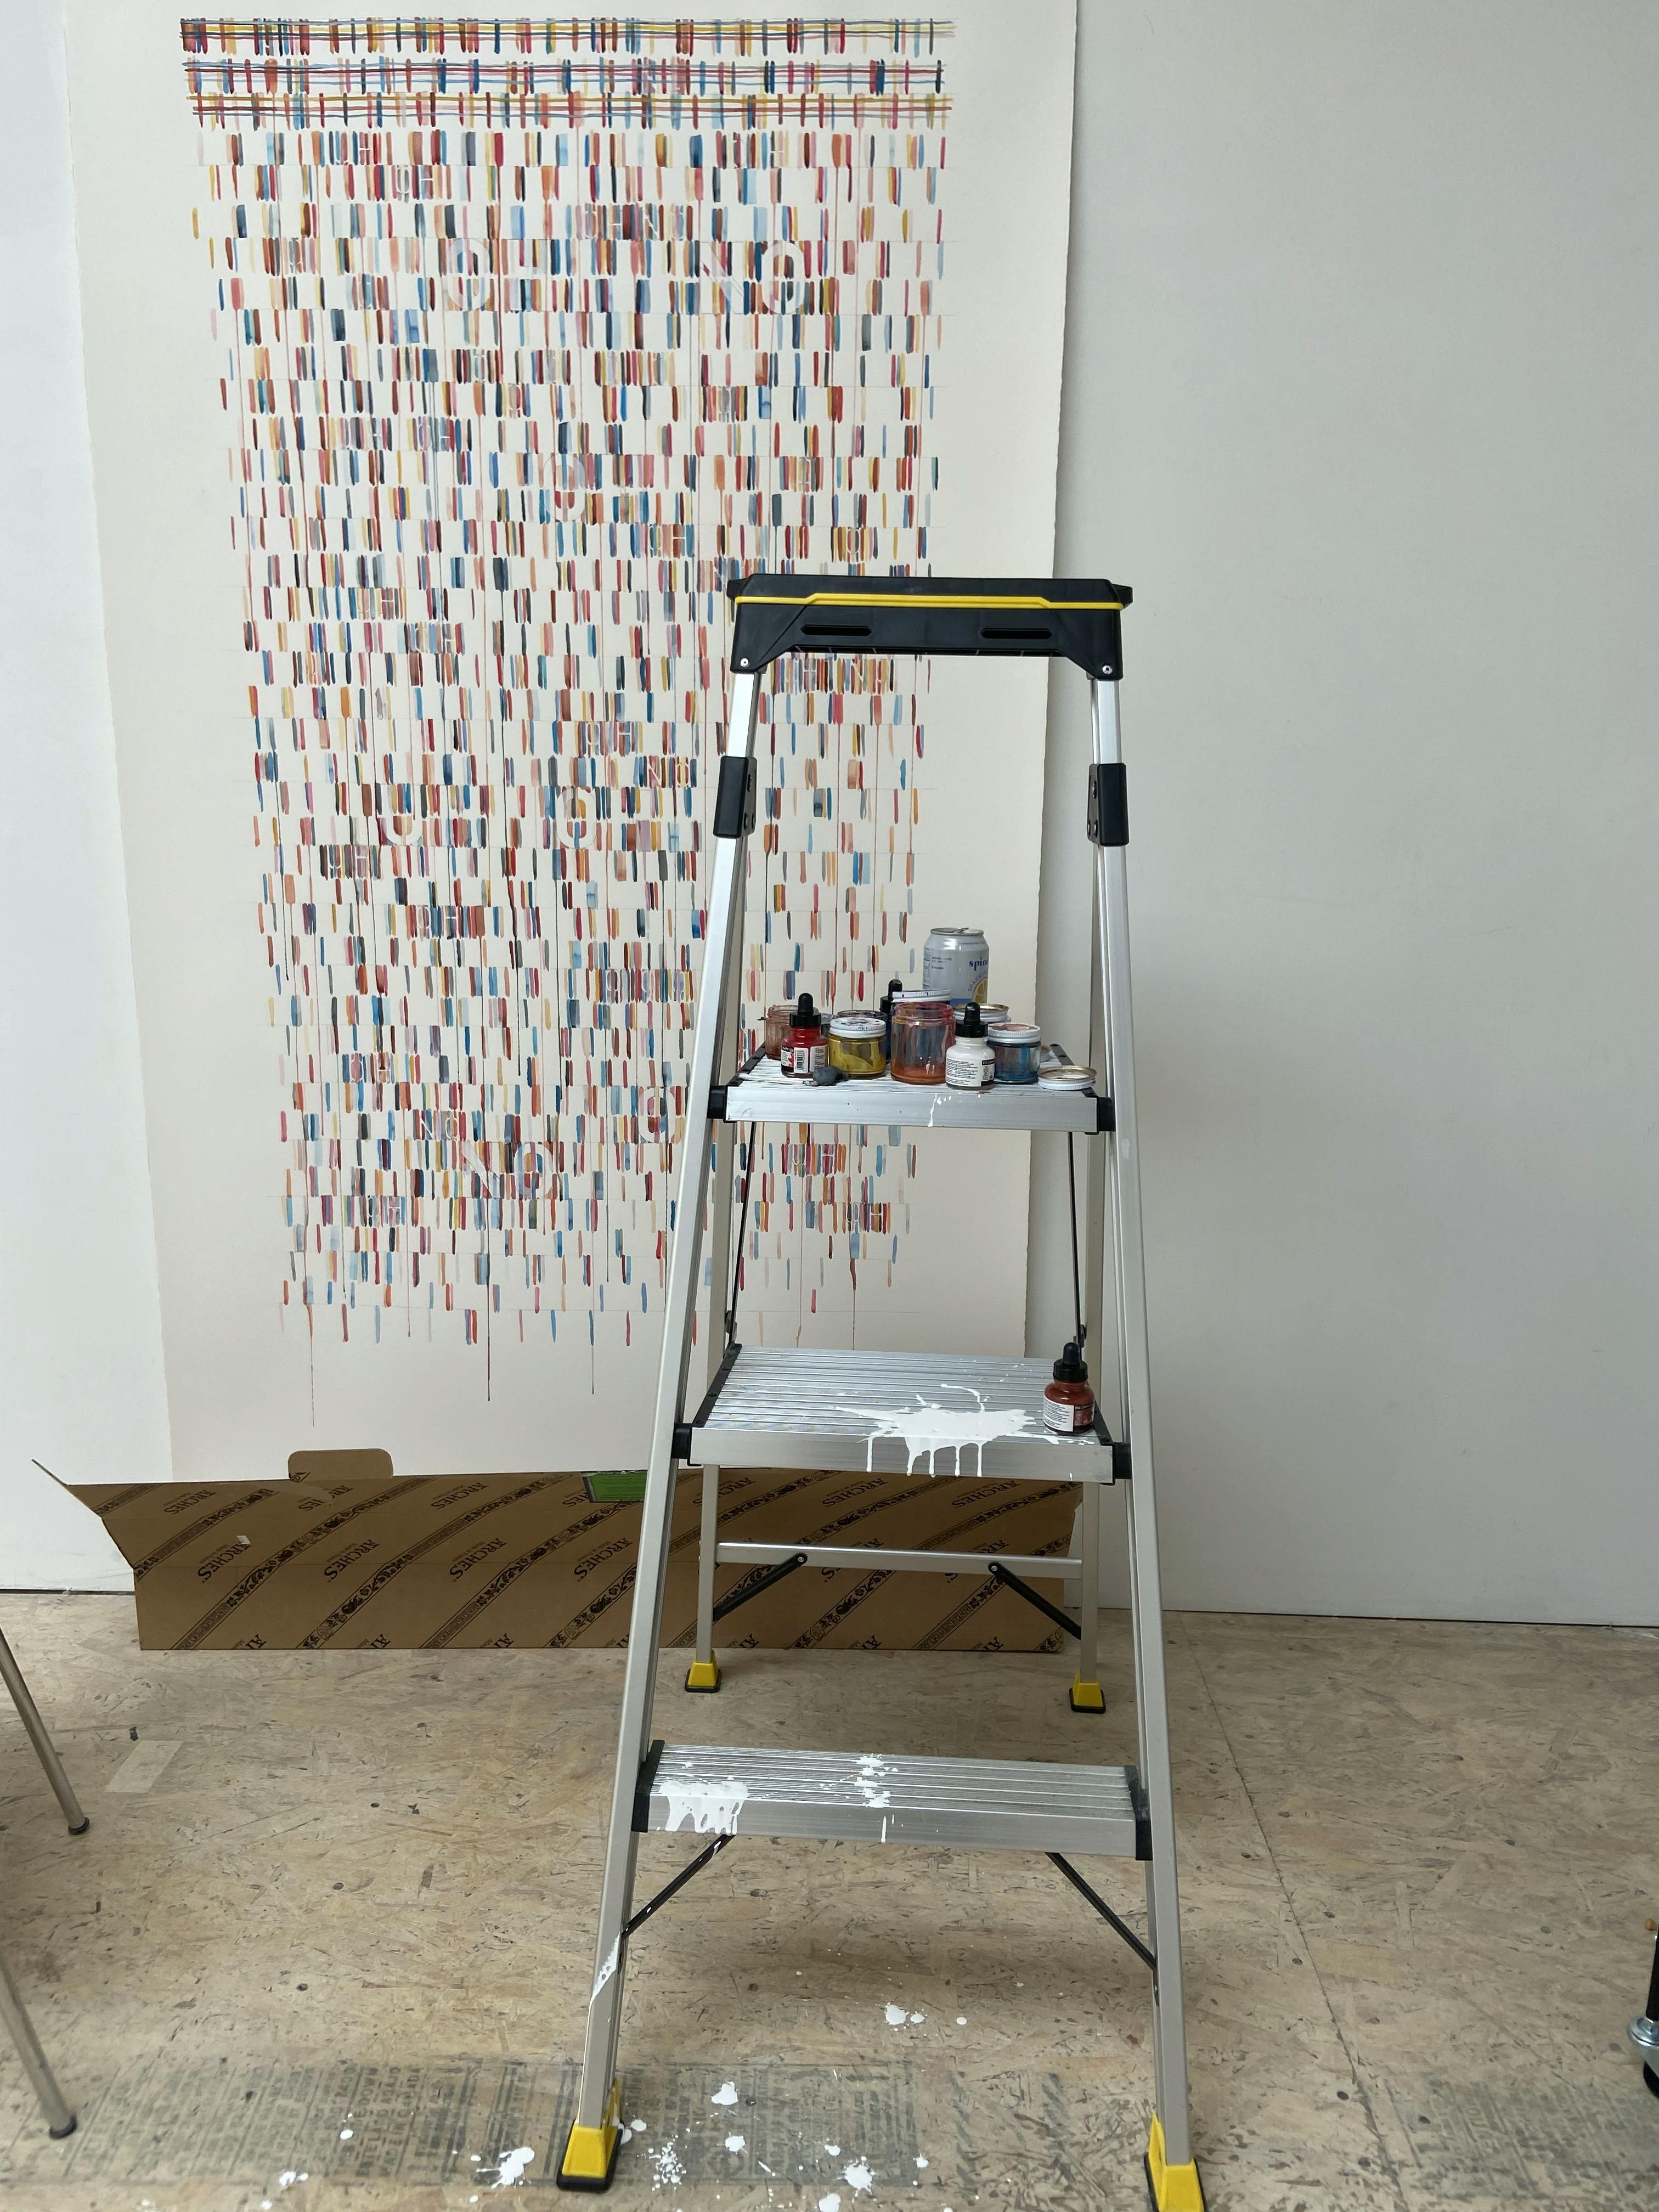 A ladder in front of a large, text-based work on paper in artist Gail Tarantino's studio.